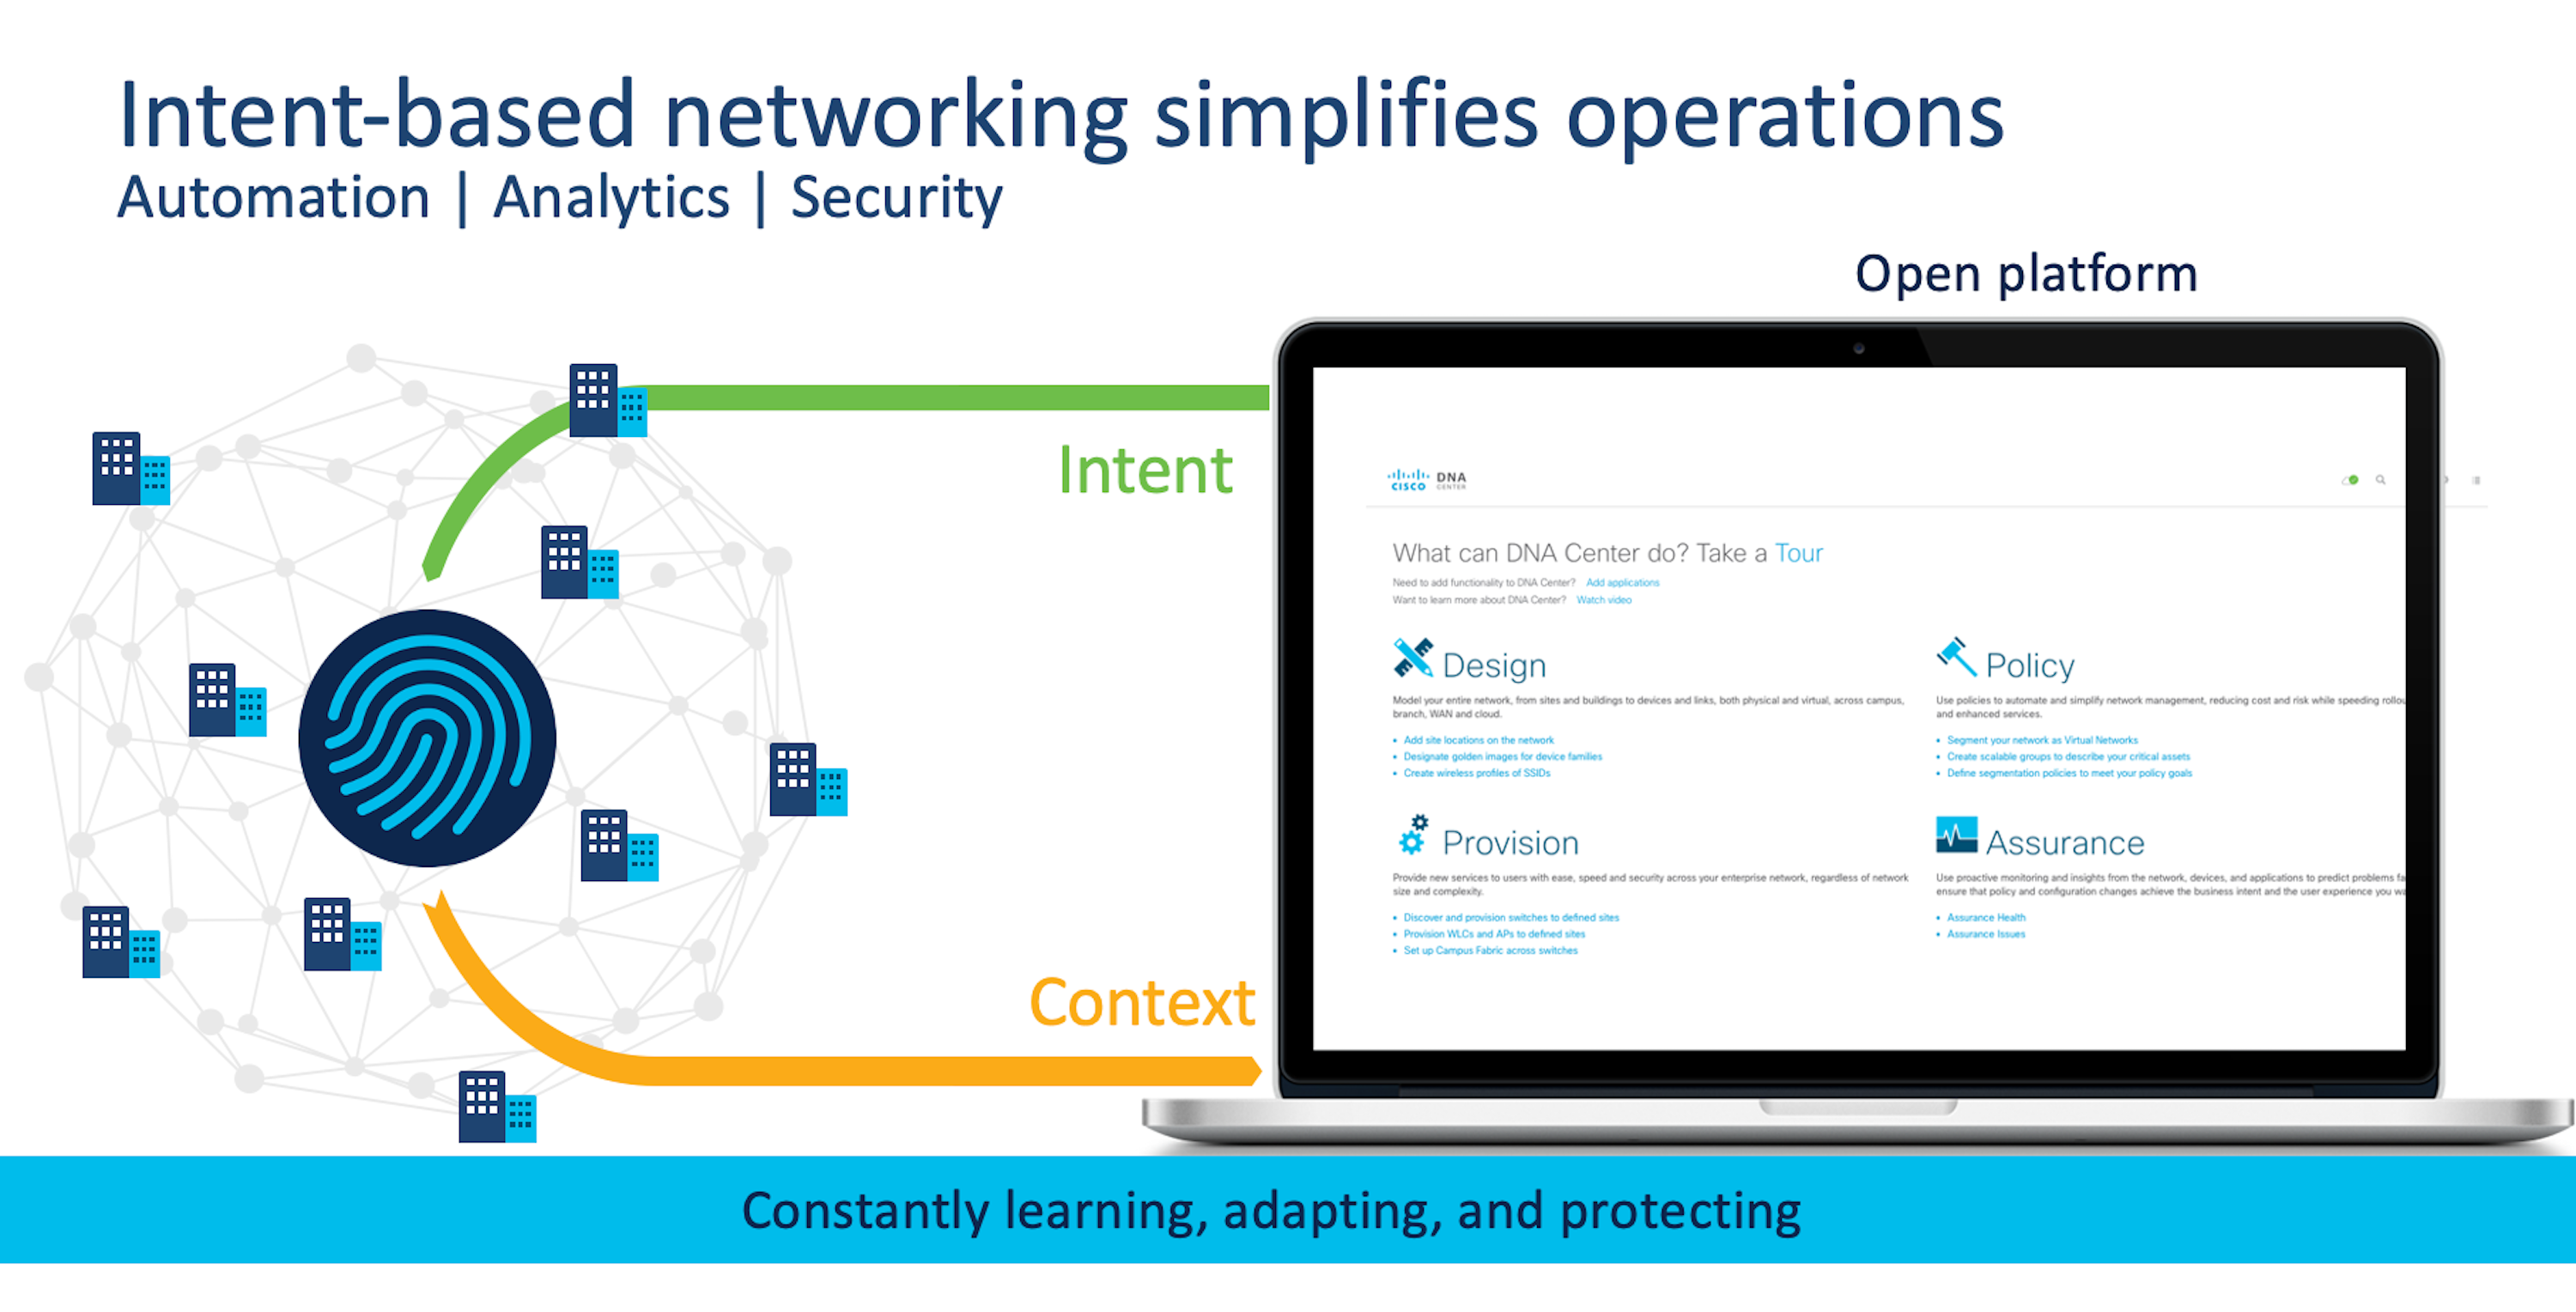 Customers want Network Operations Simplification